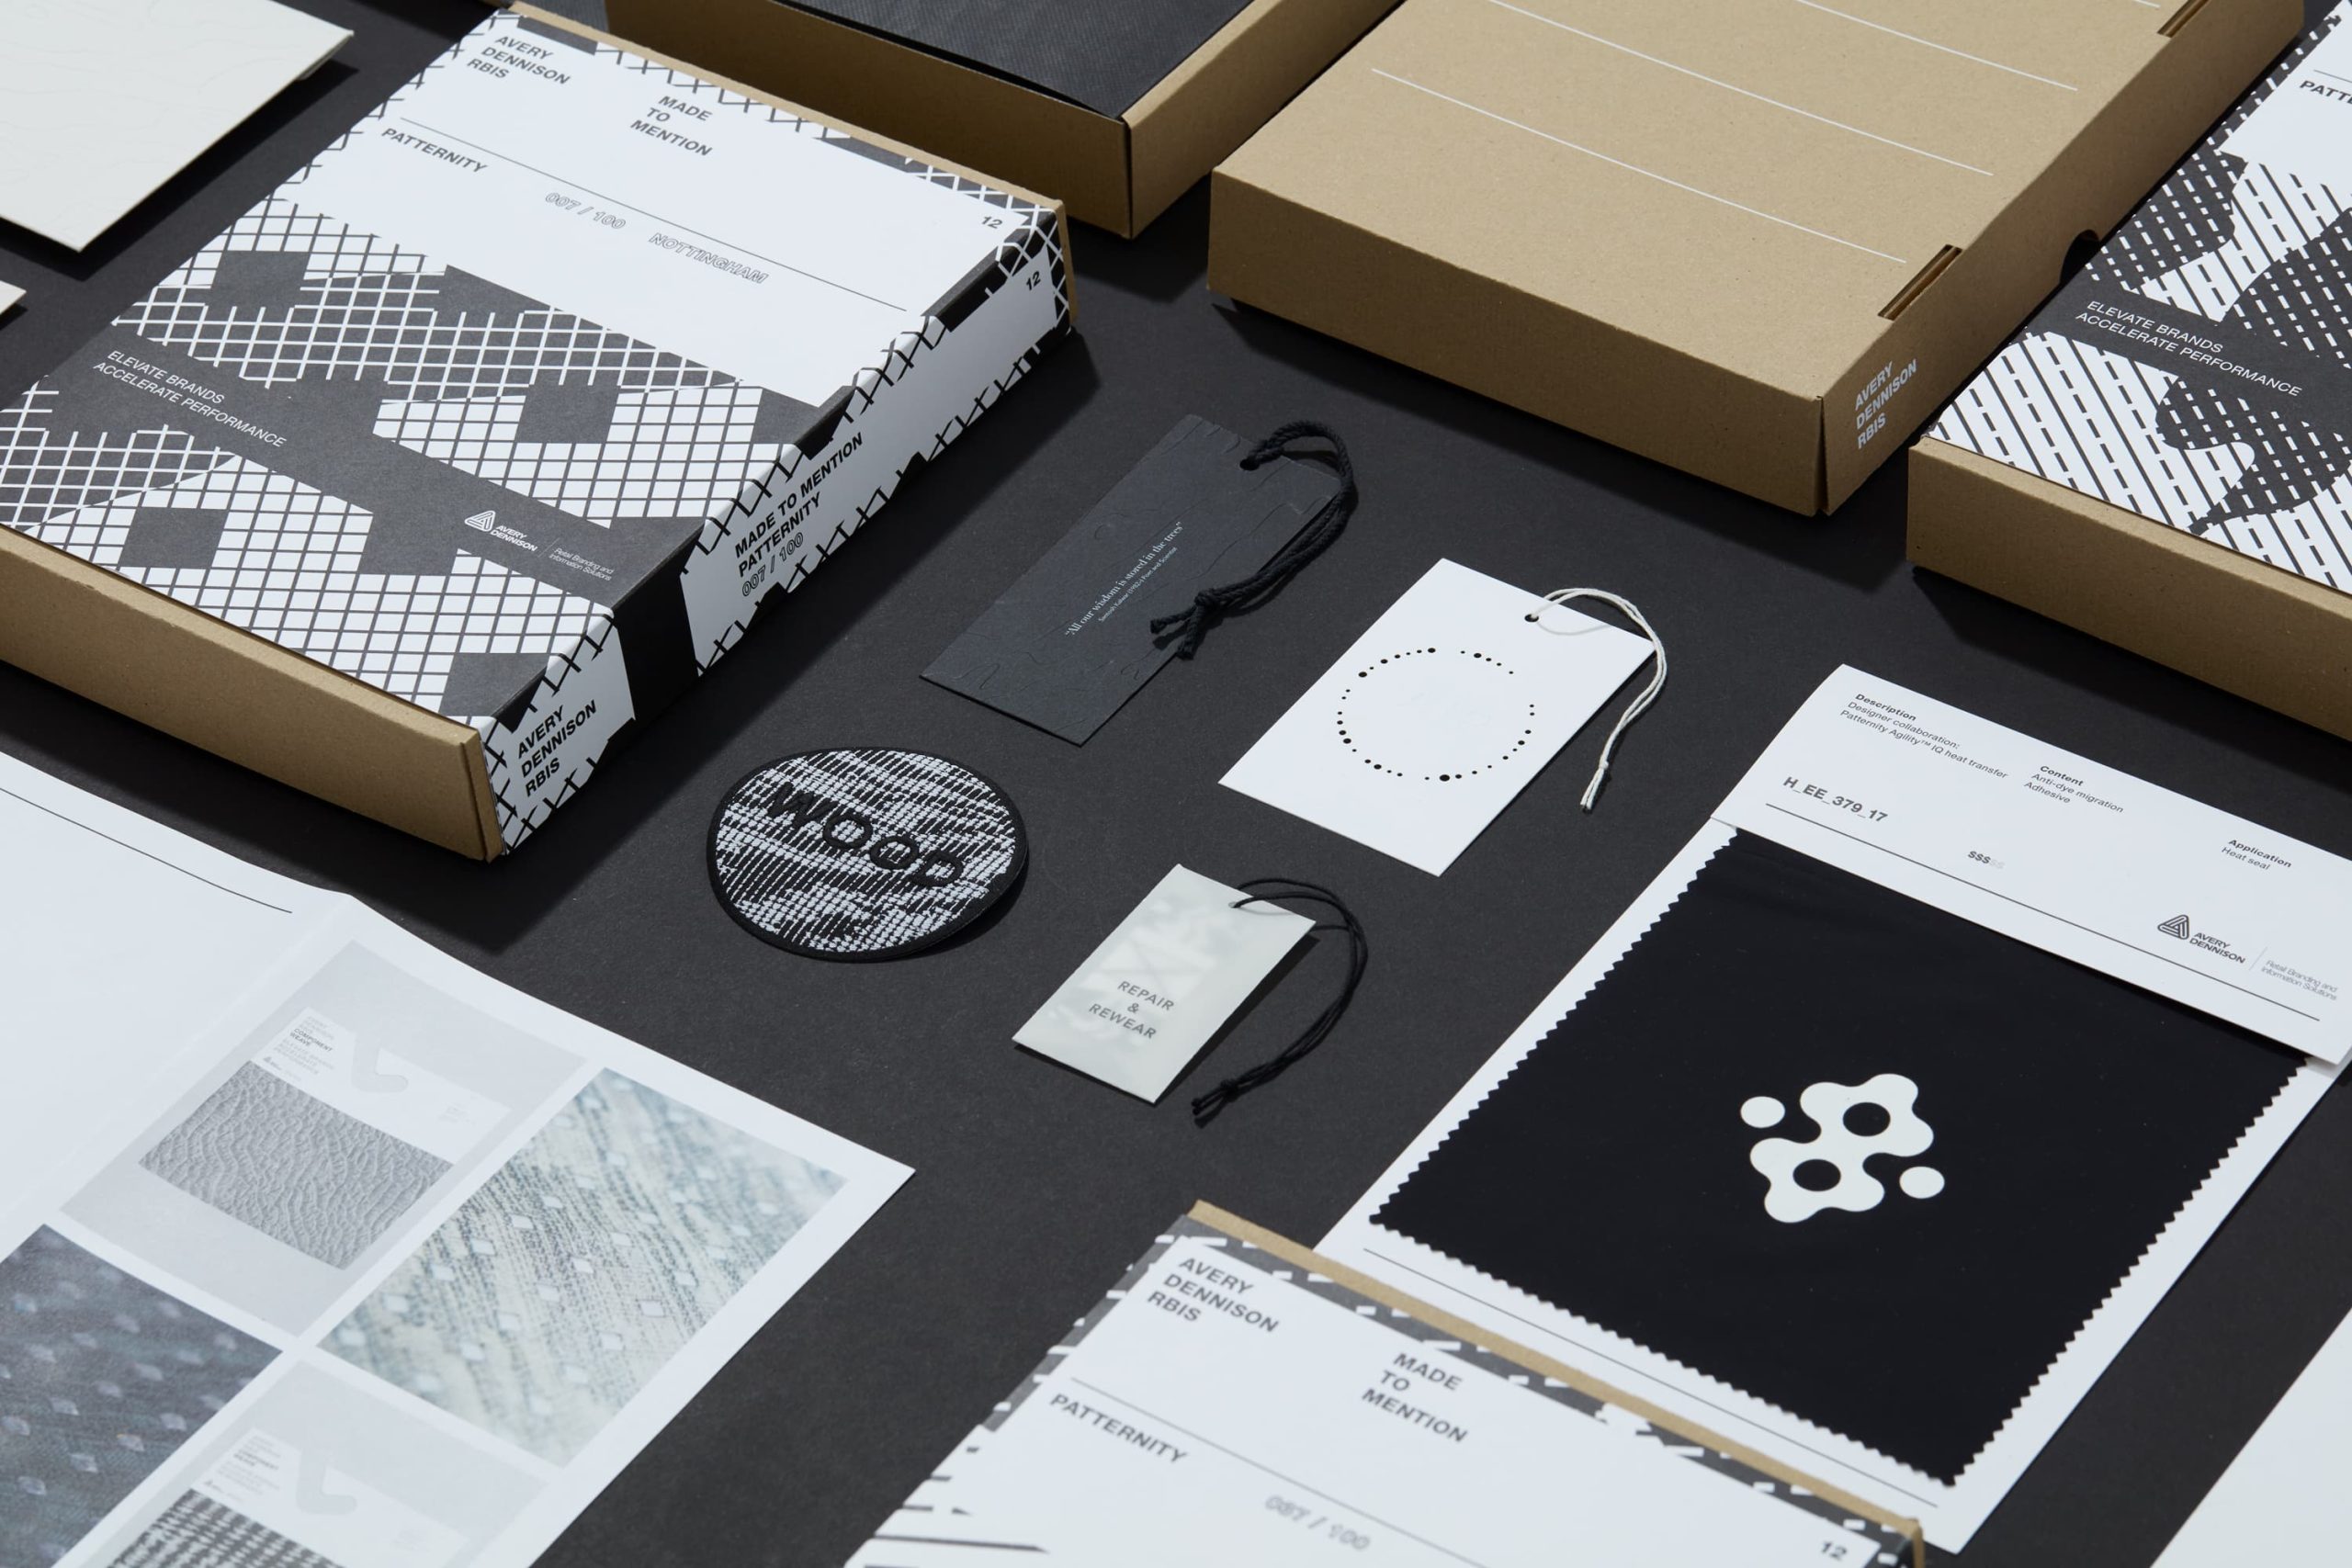 Avery Dennison collaboration with Patternity. Photo of all the box contents